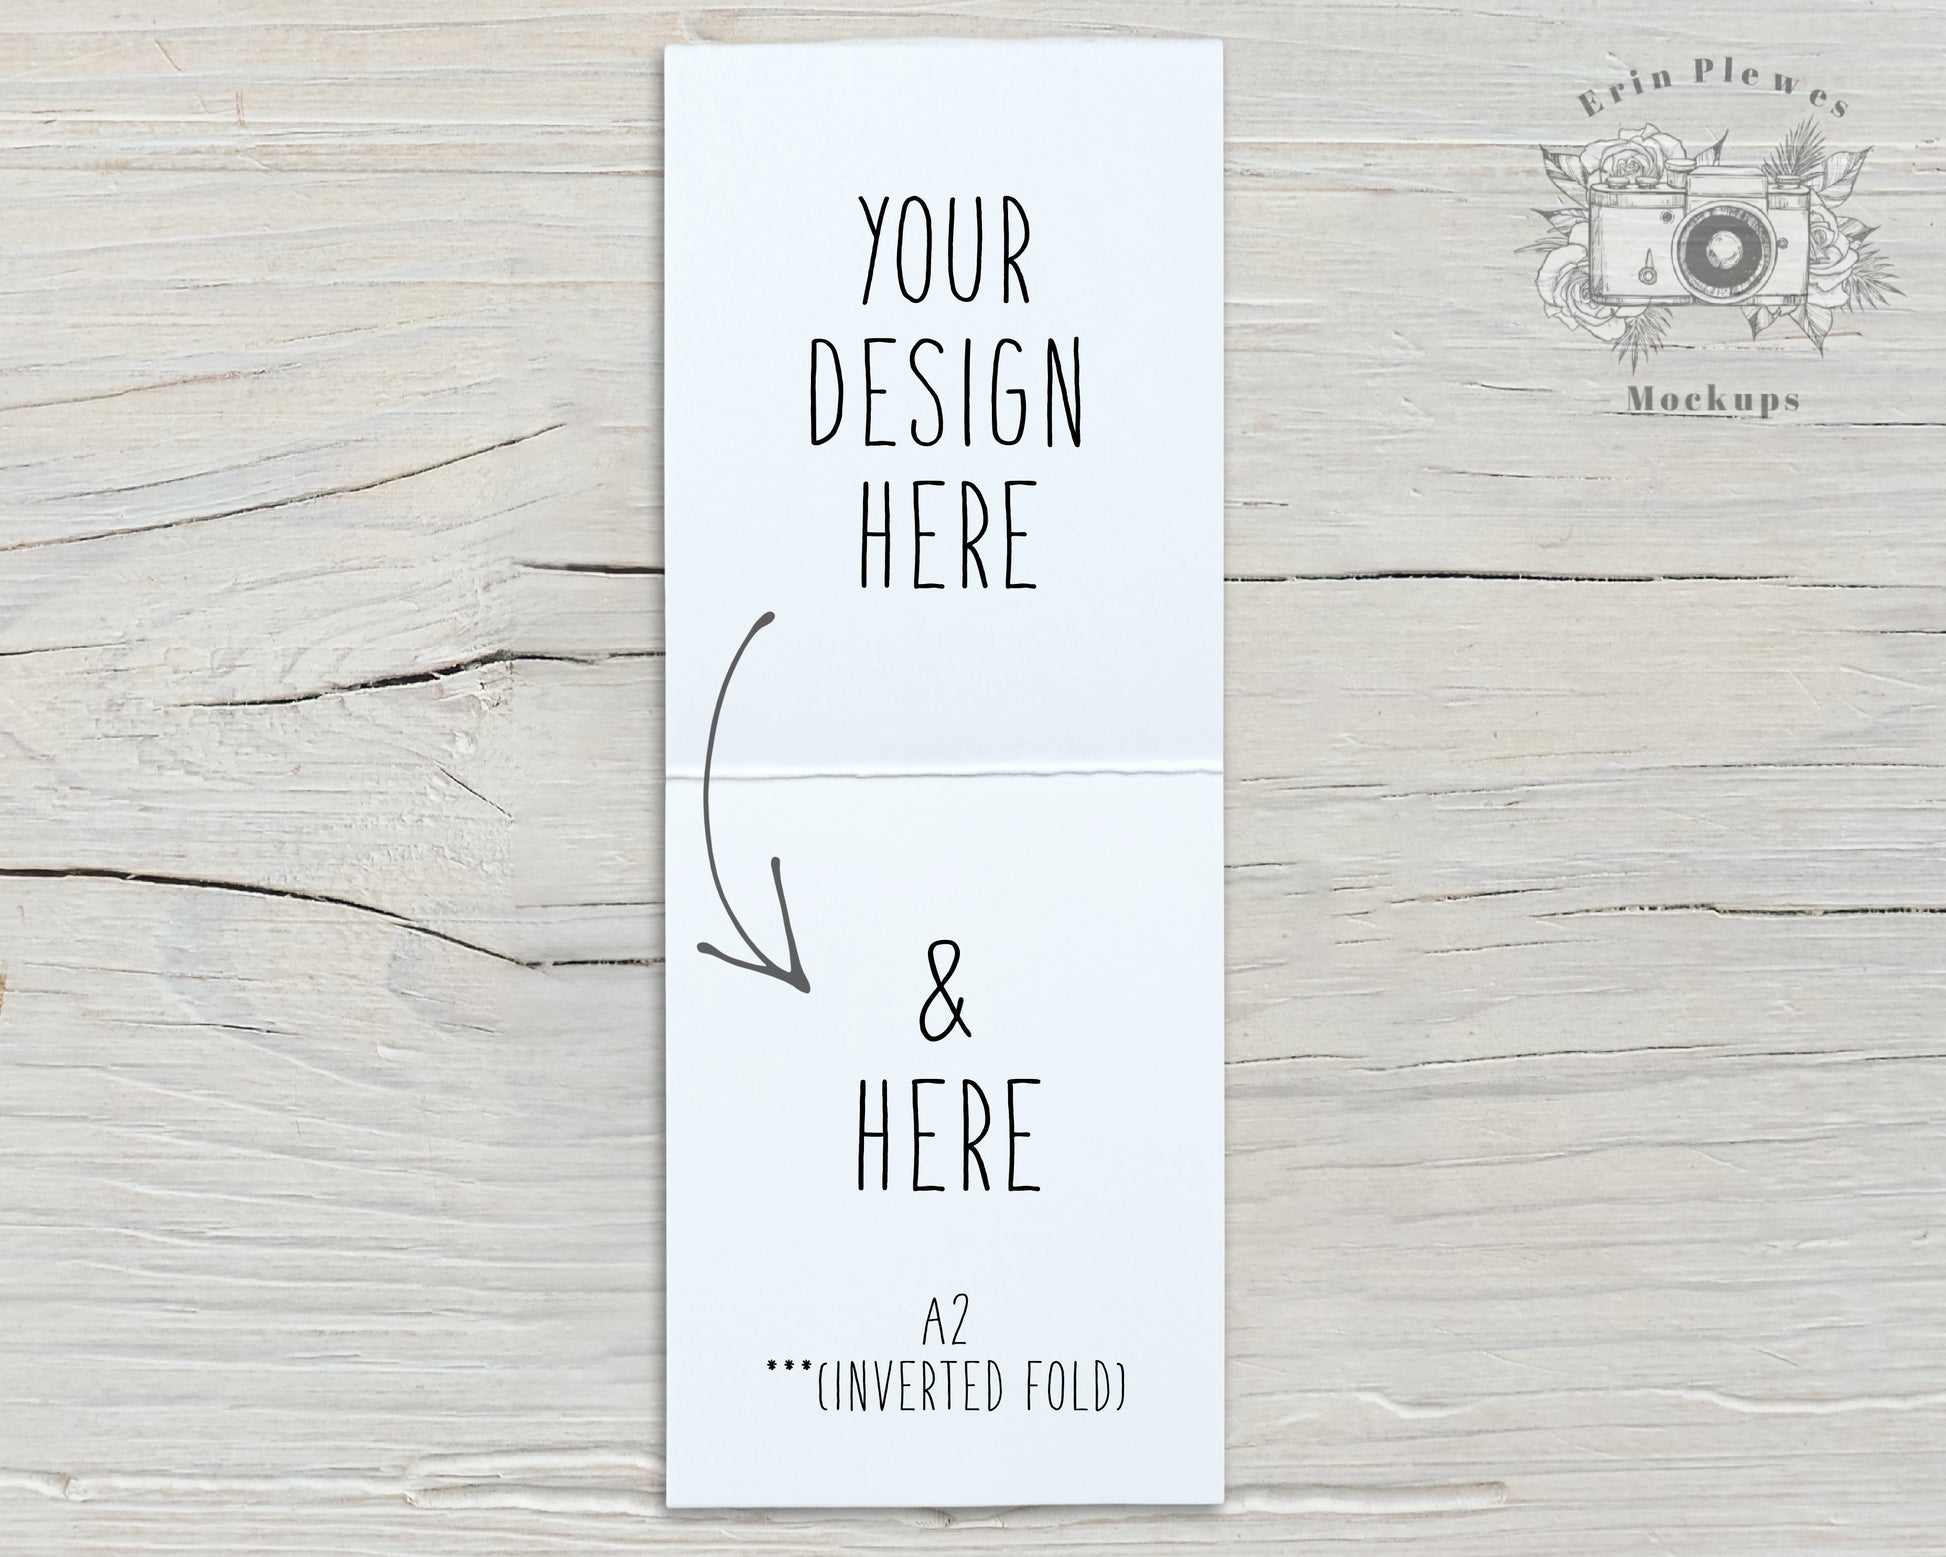 White A2 Card Mockup Open With An Inverse Fold Sitting On Rustic White Wood Tall Orientation